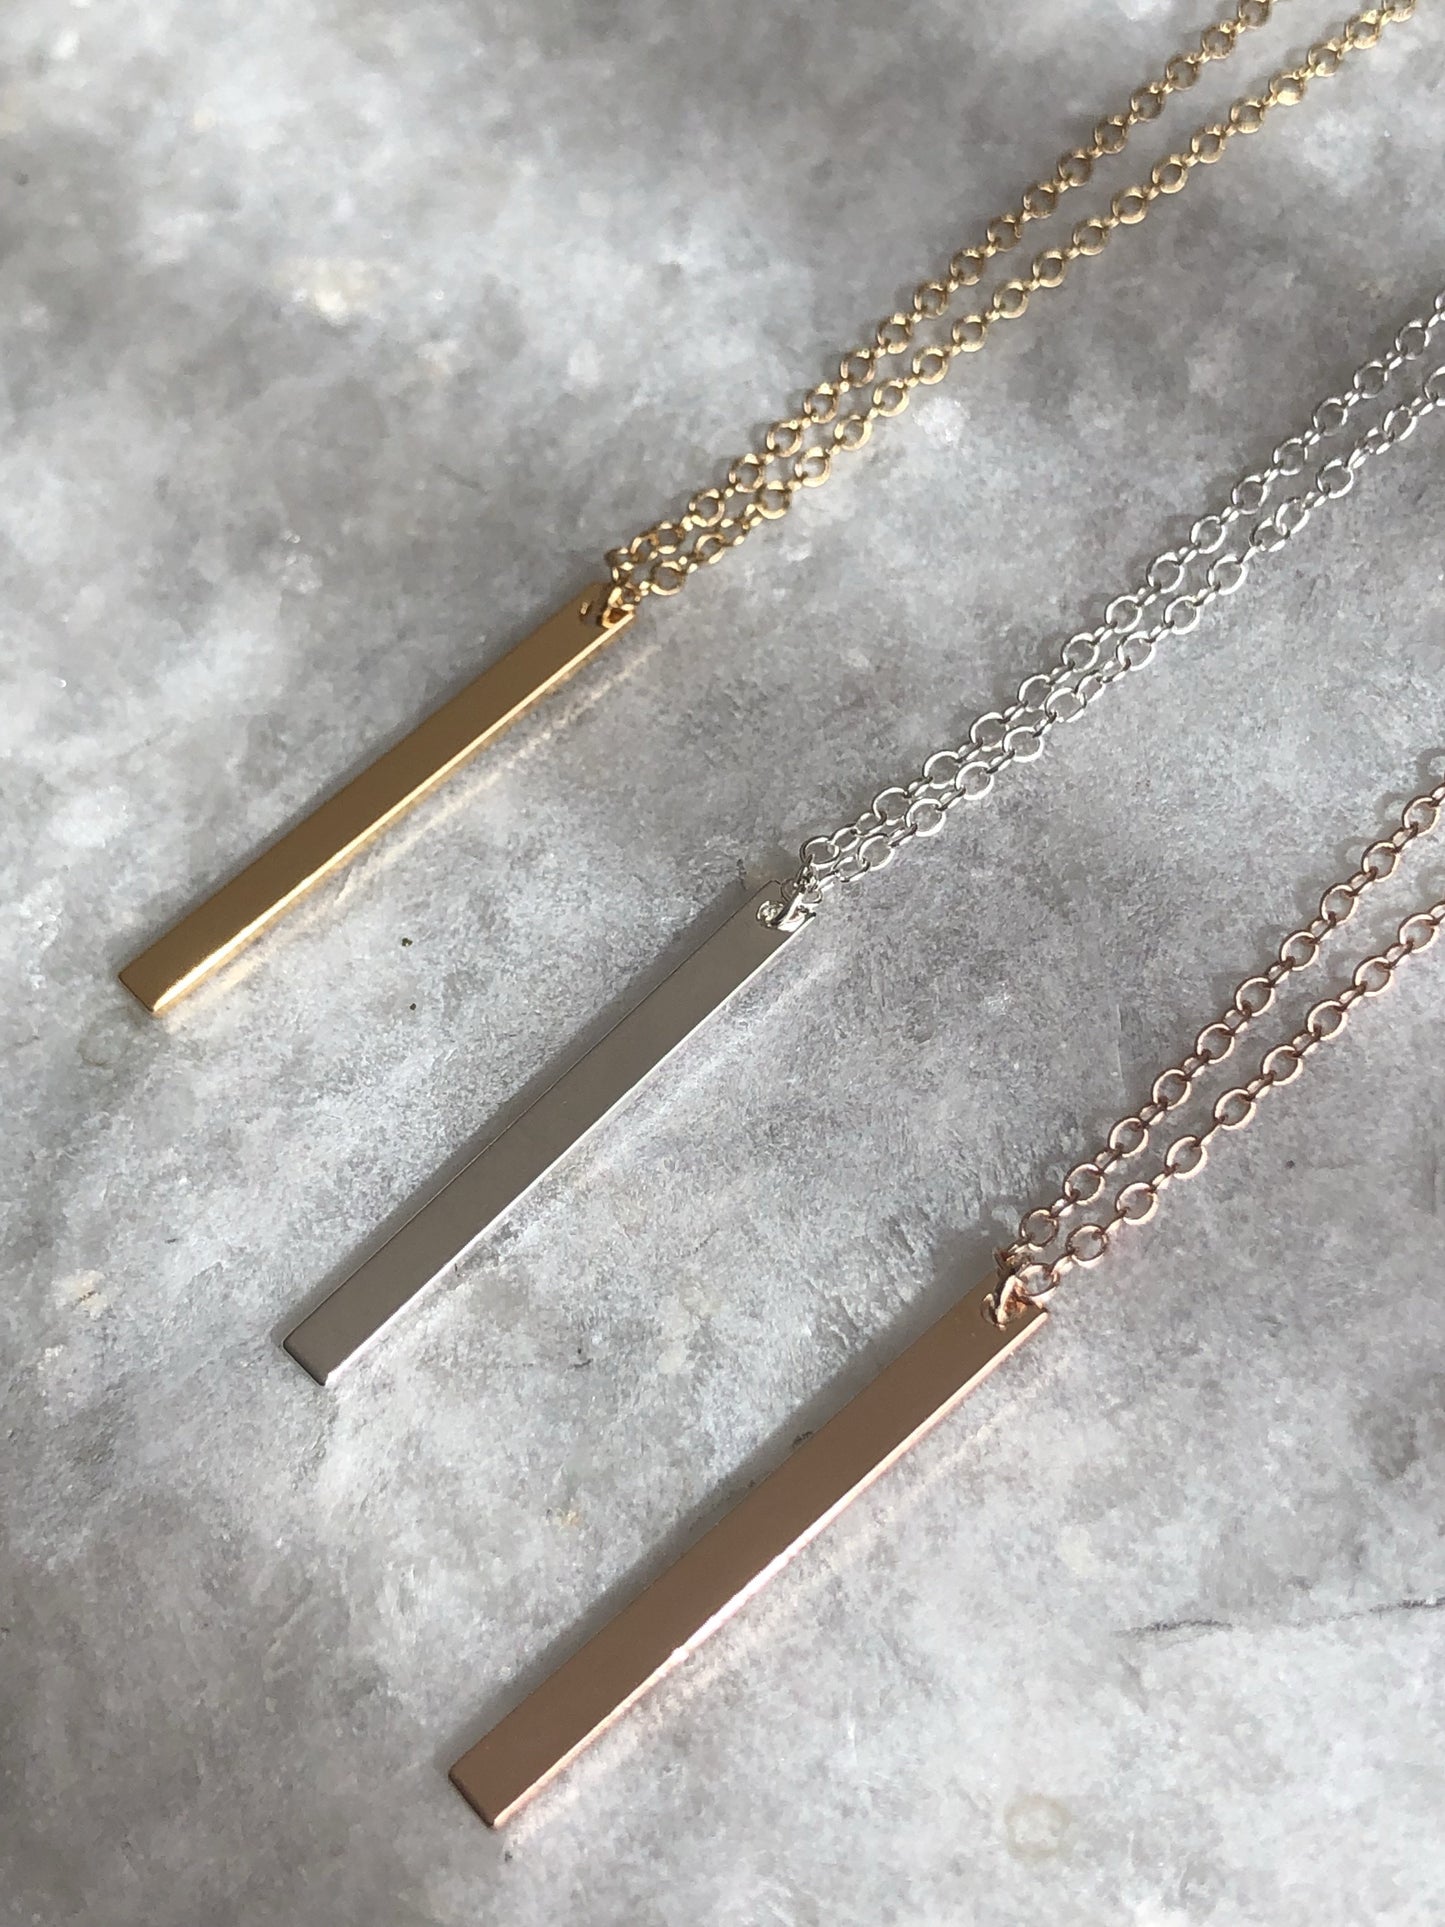 Bar Pendant: available in silver, gold, or rose gold